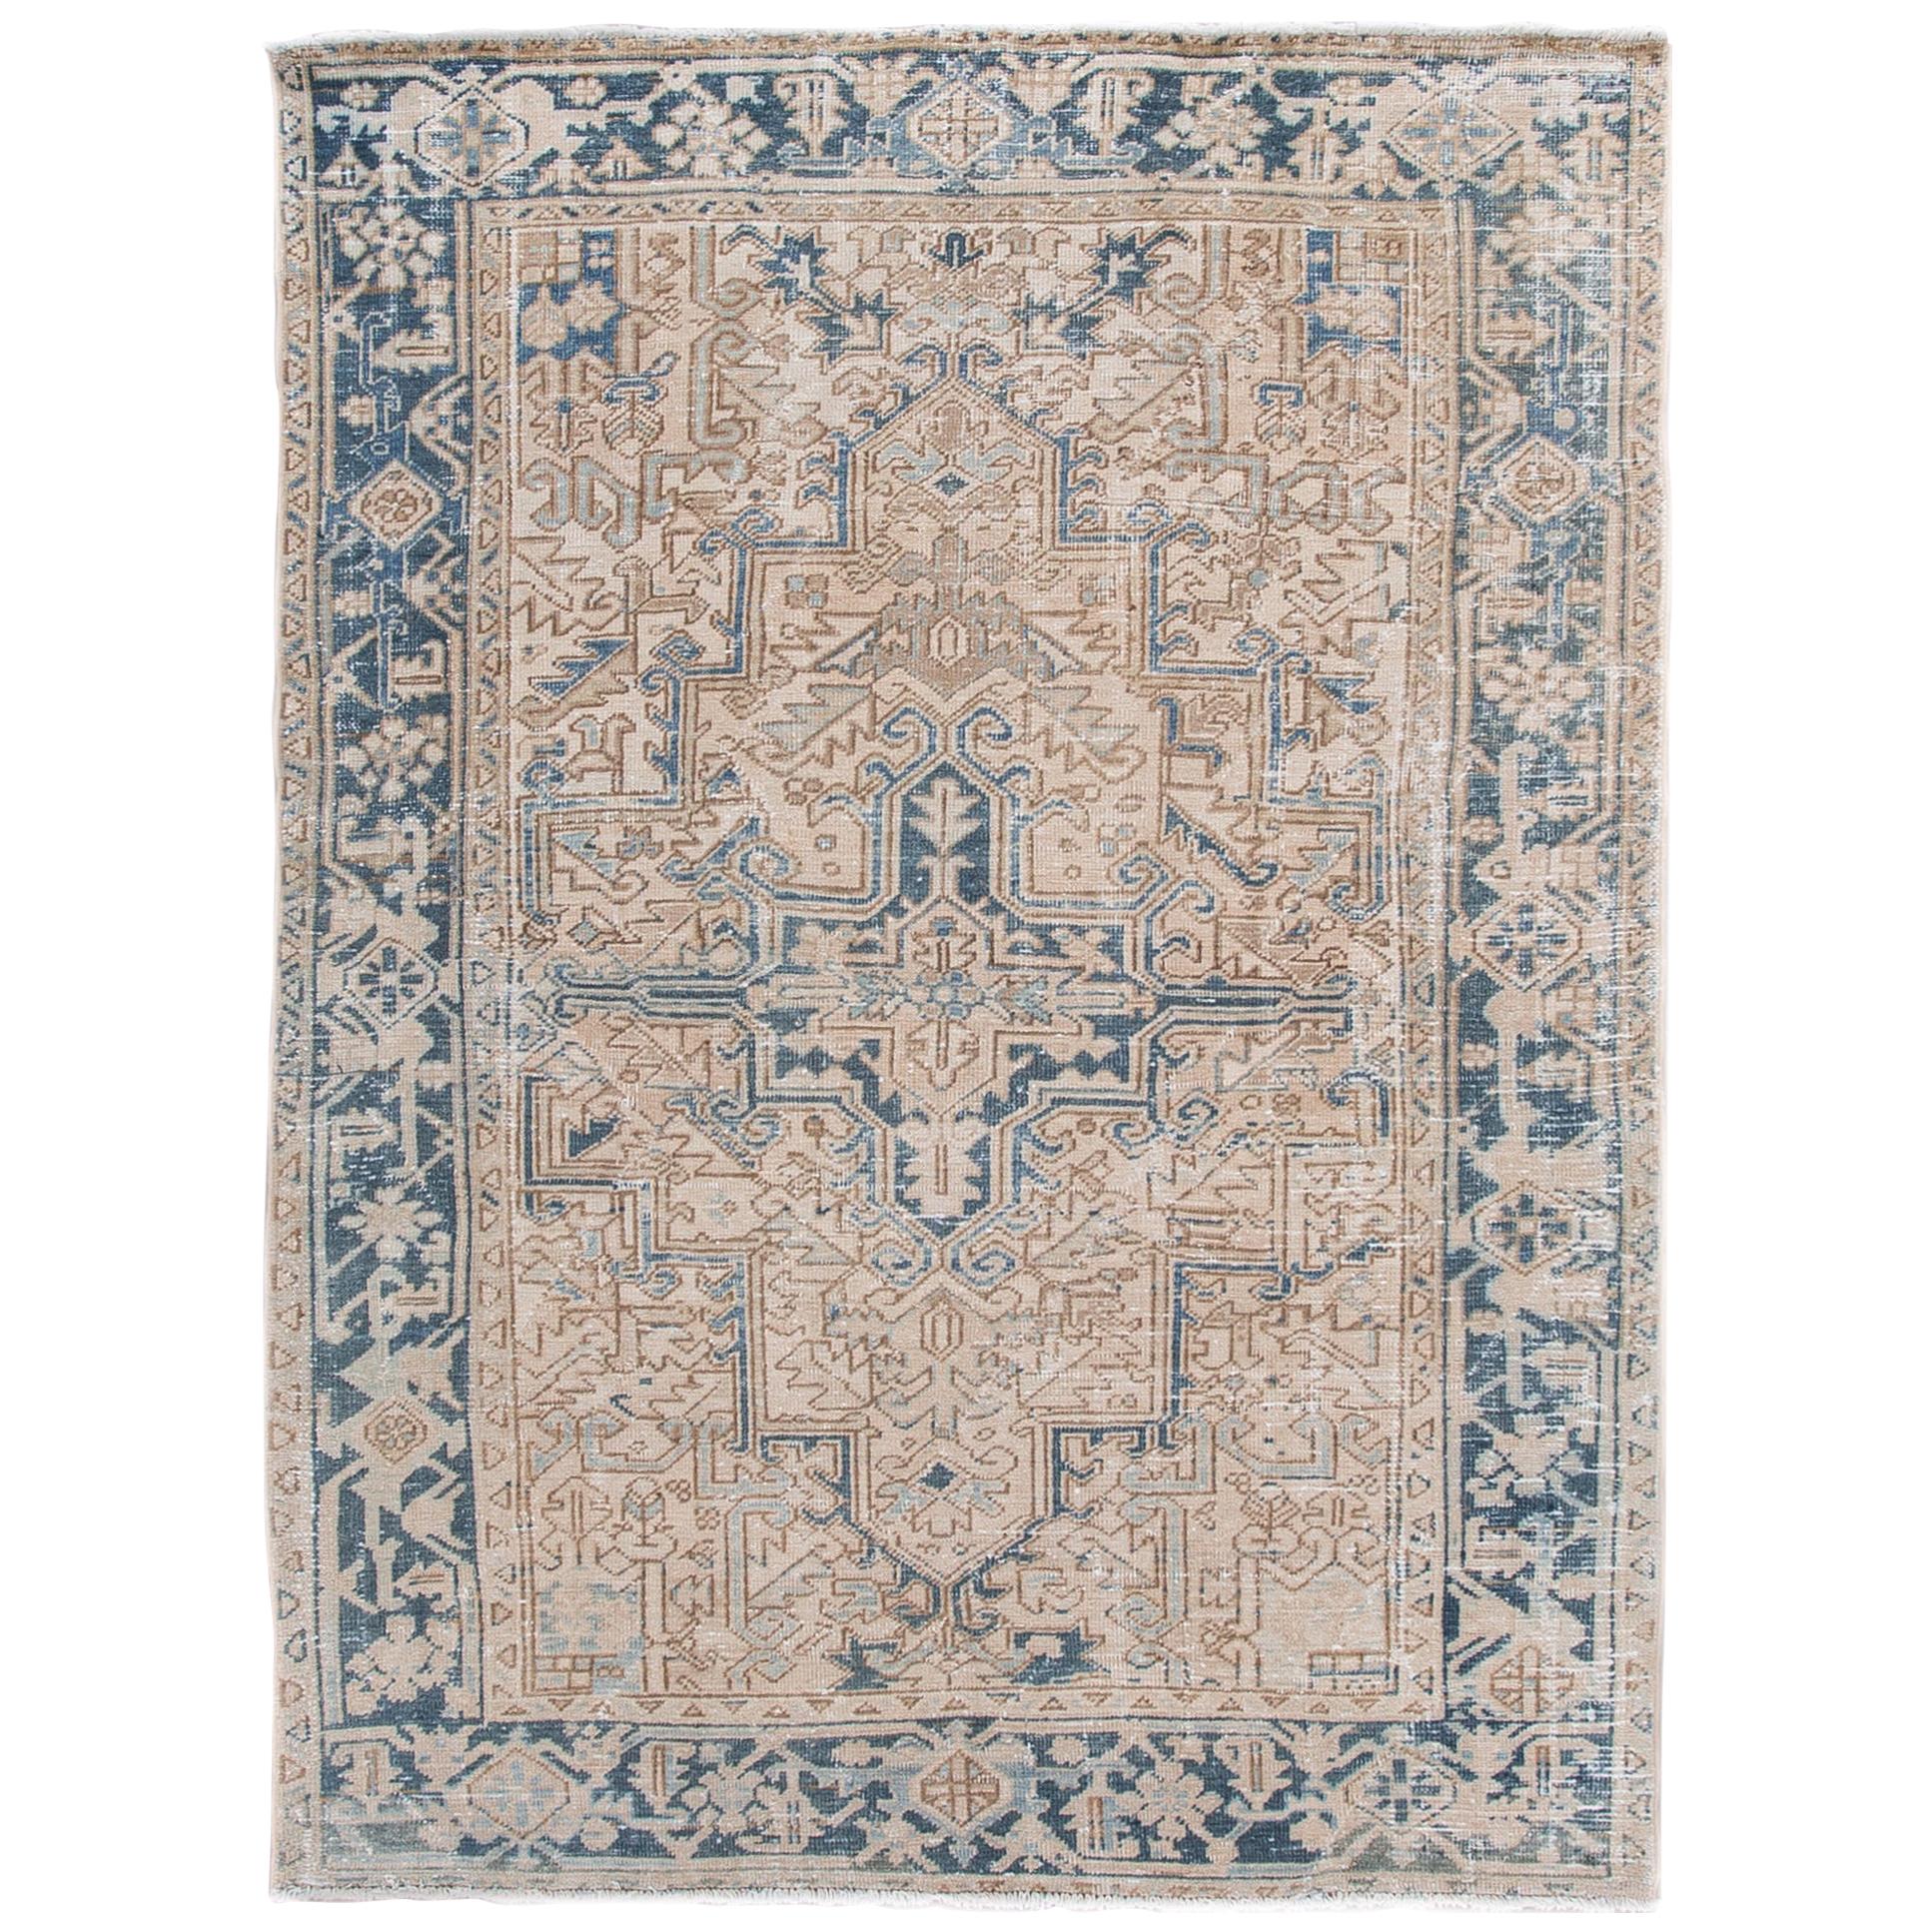 Antique Heriz Shabby Chic Beige and Blue Handmade Wool Rug For Sale